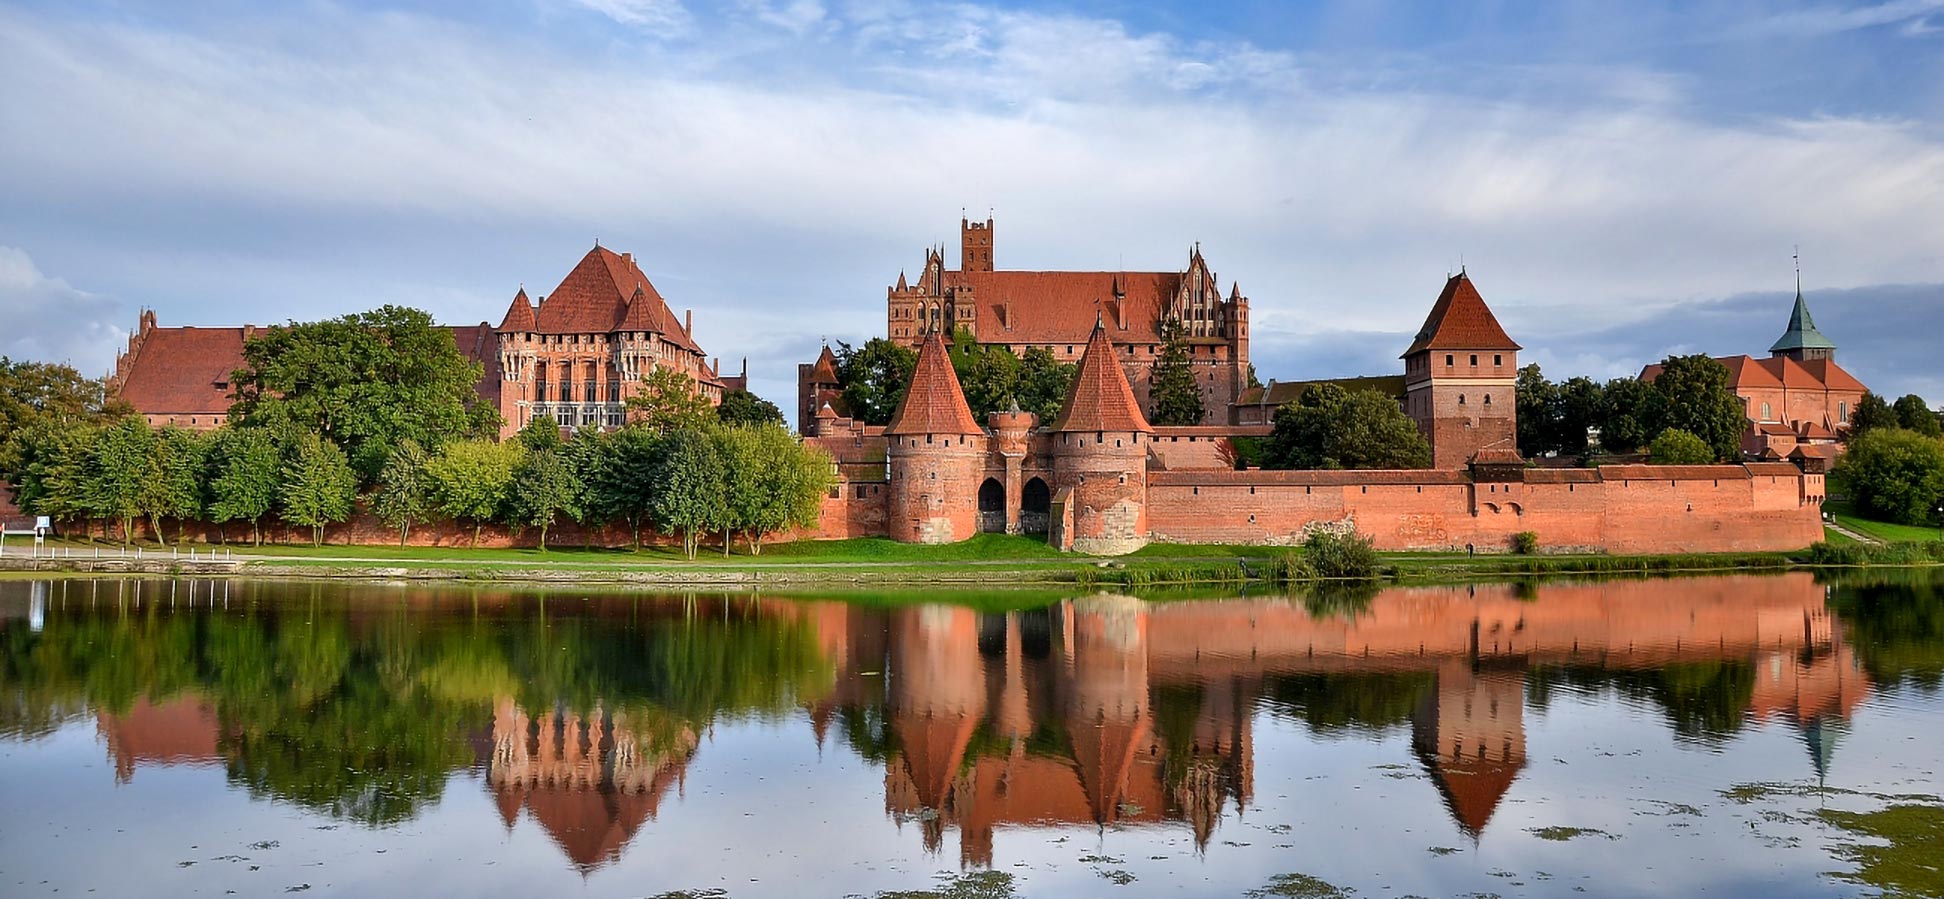 Poland - Country Profile - Destination Poland - Nations Online Project